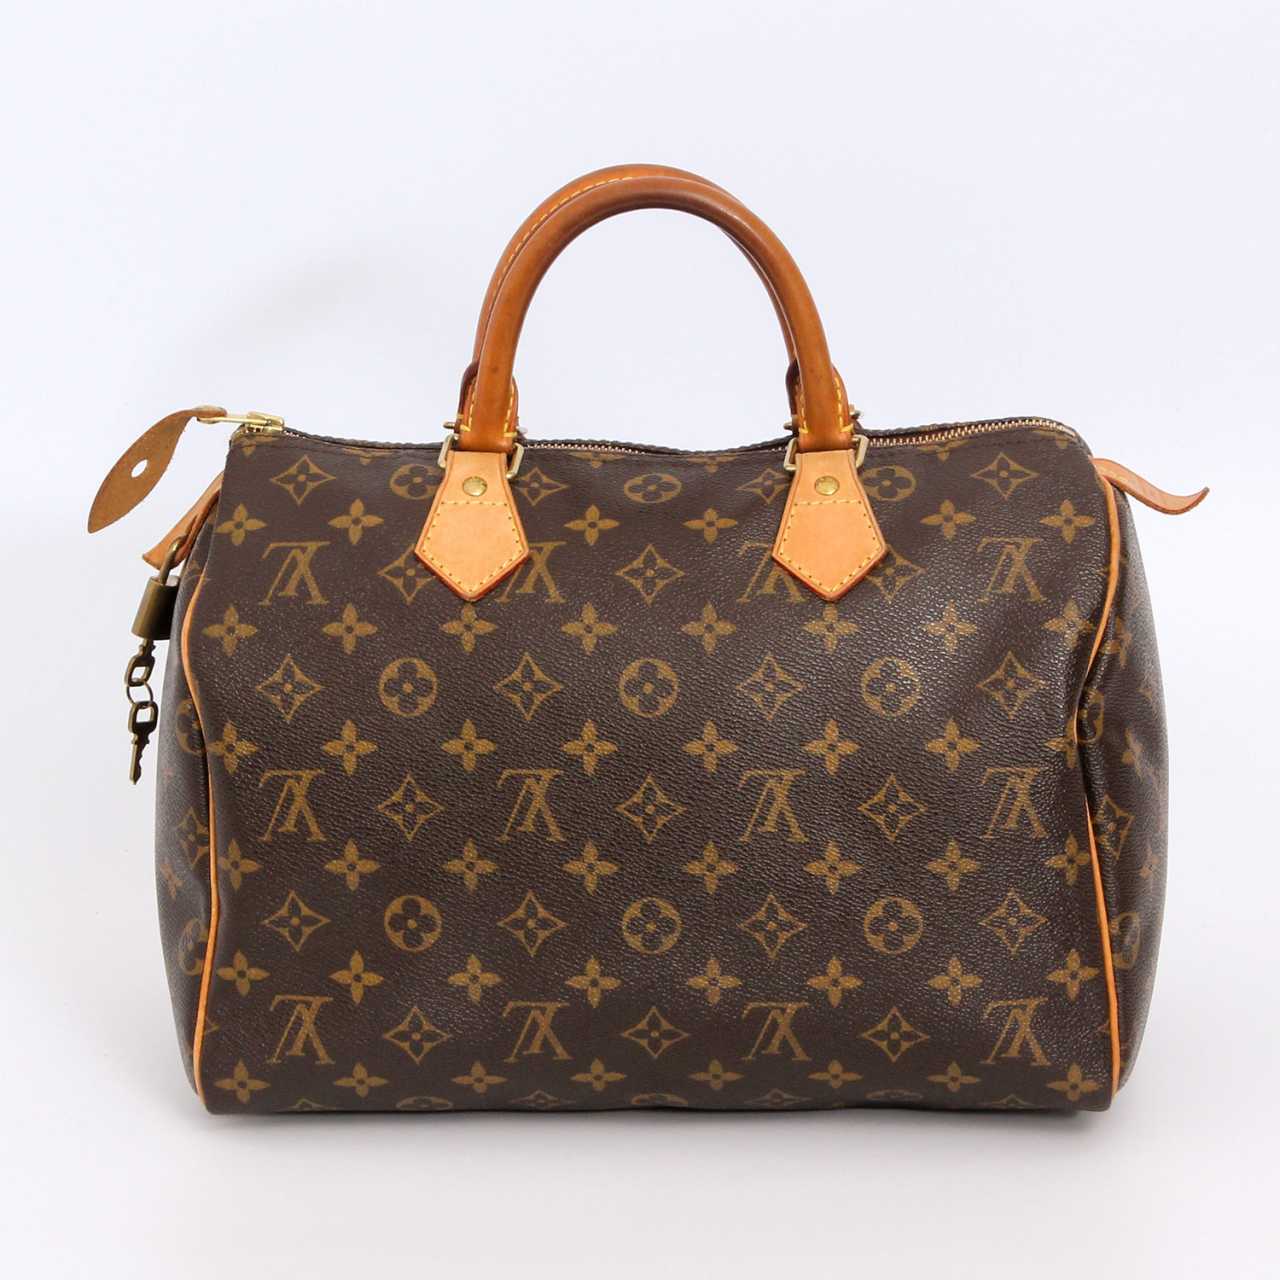 LOUIS VUITTON coveted handbag "SPEEDY 30", collection 2010. — buy at